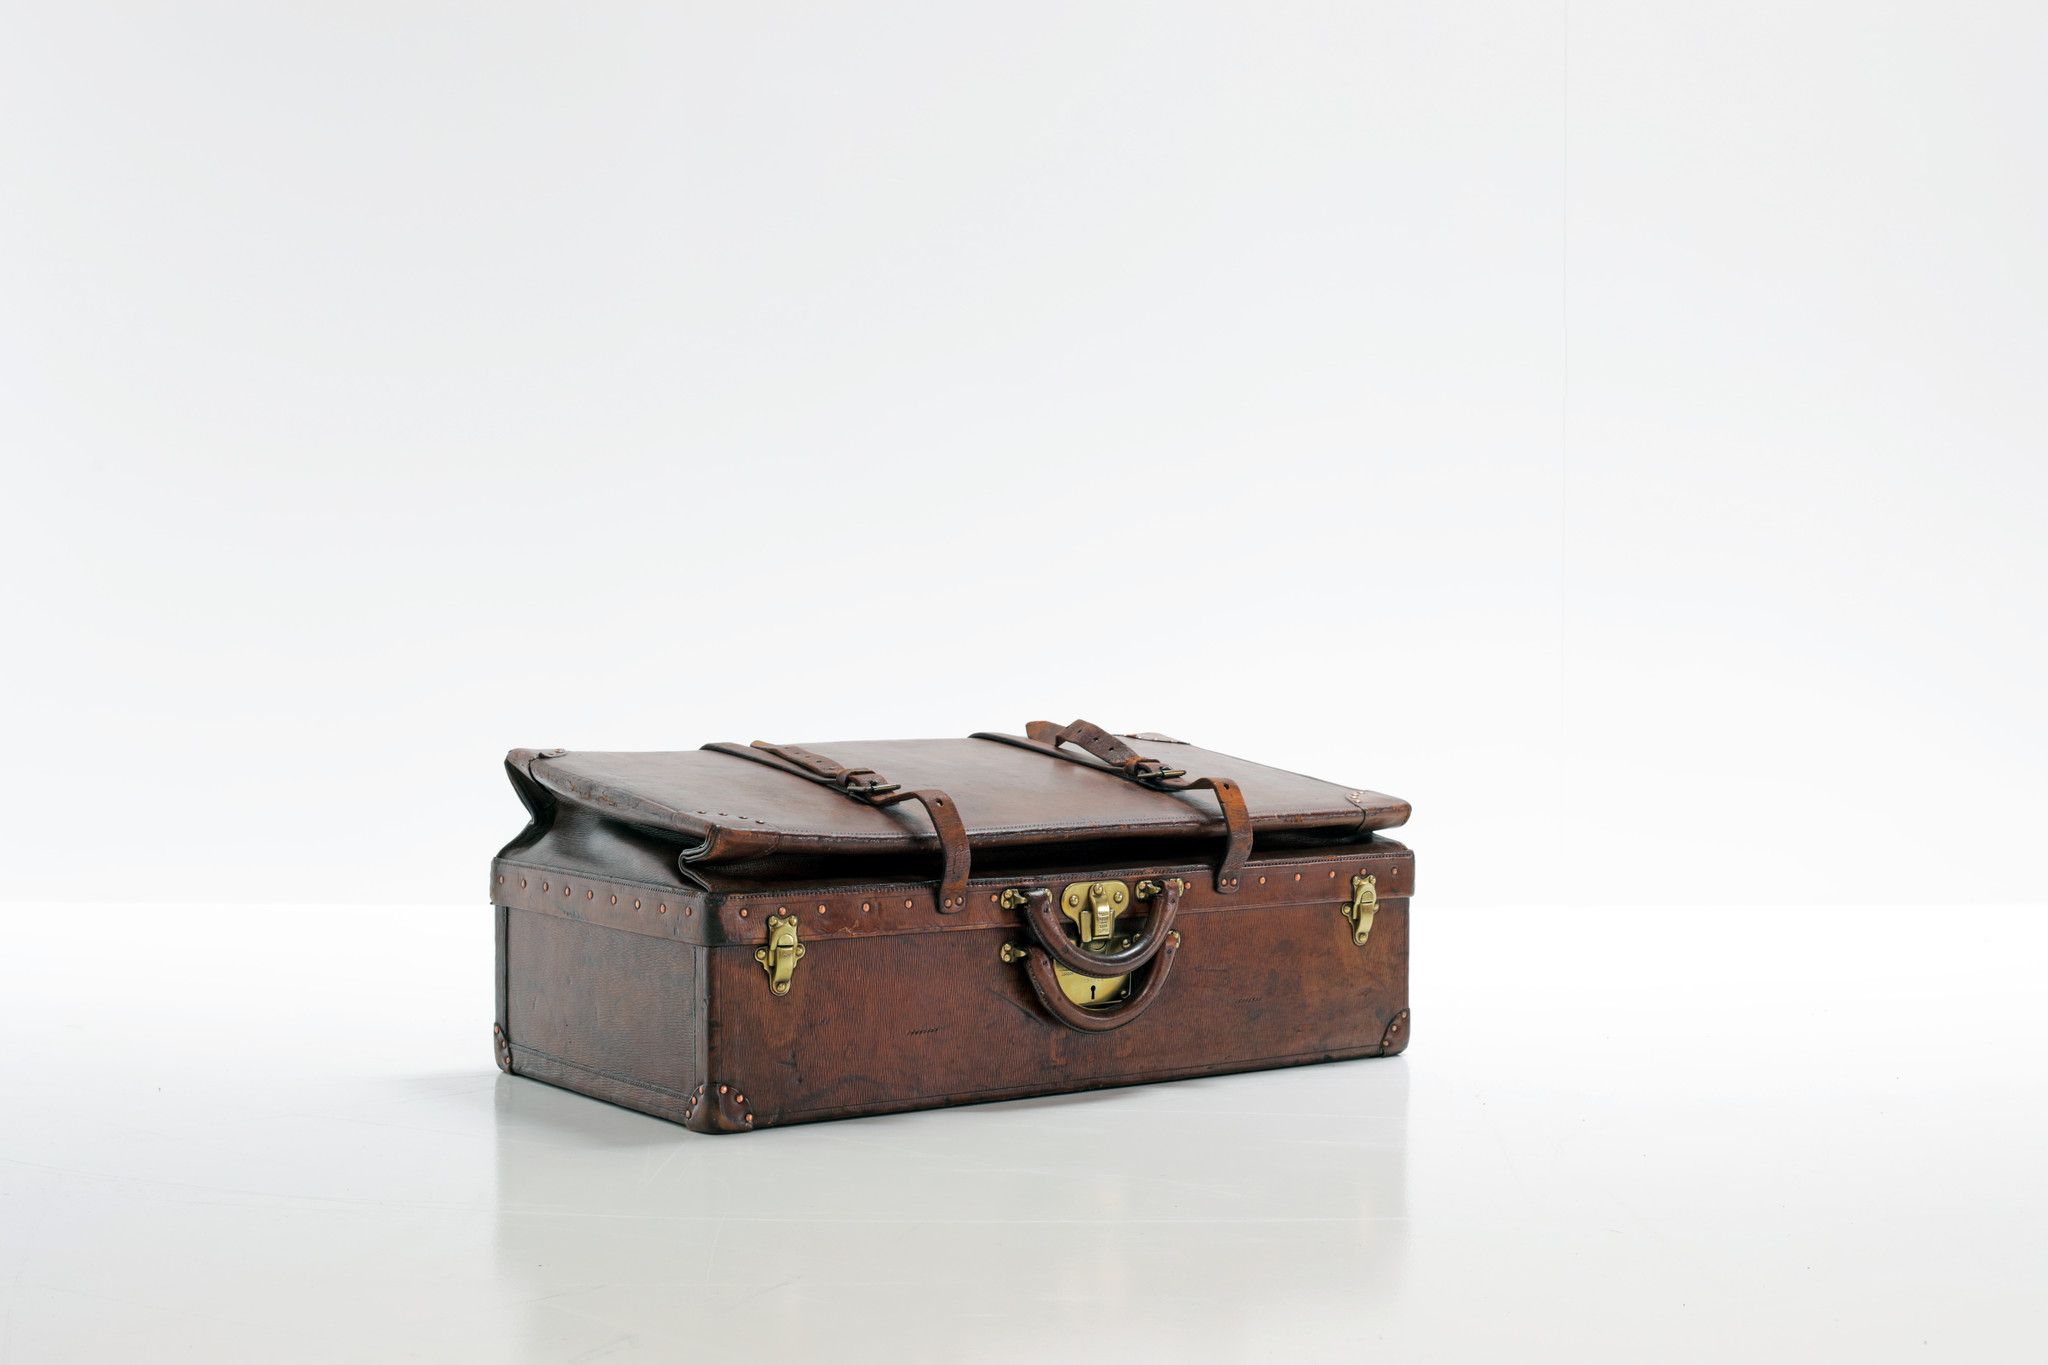 Louis Vuitton "Expandable Suitcase" in natural leather, 1910